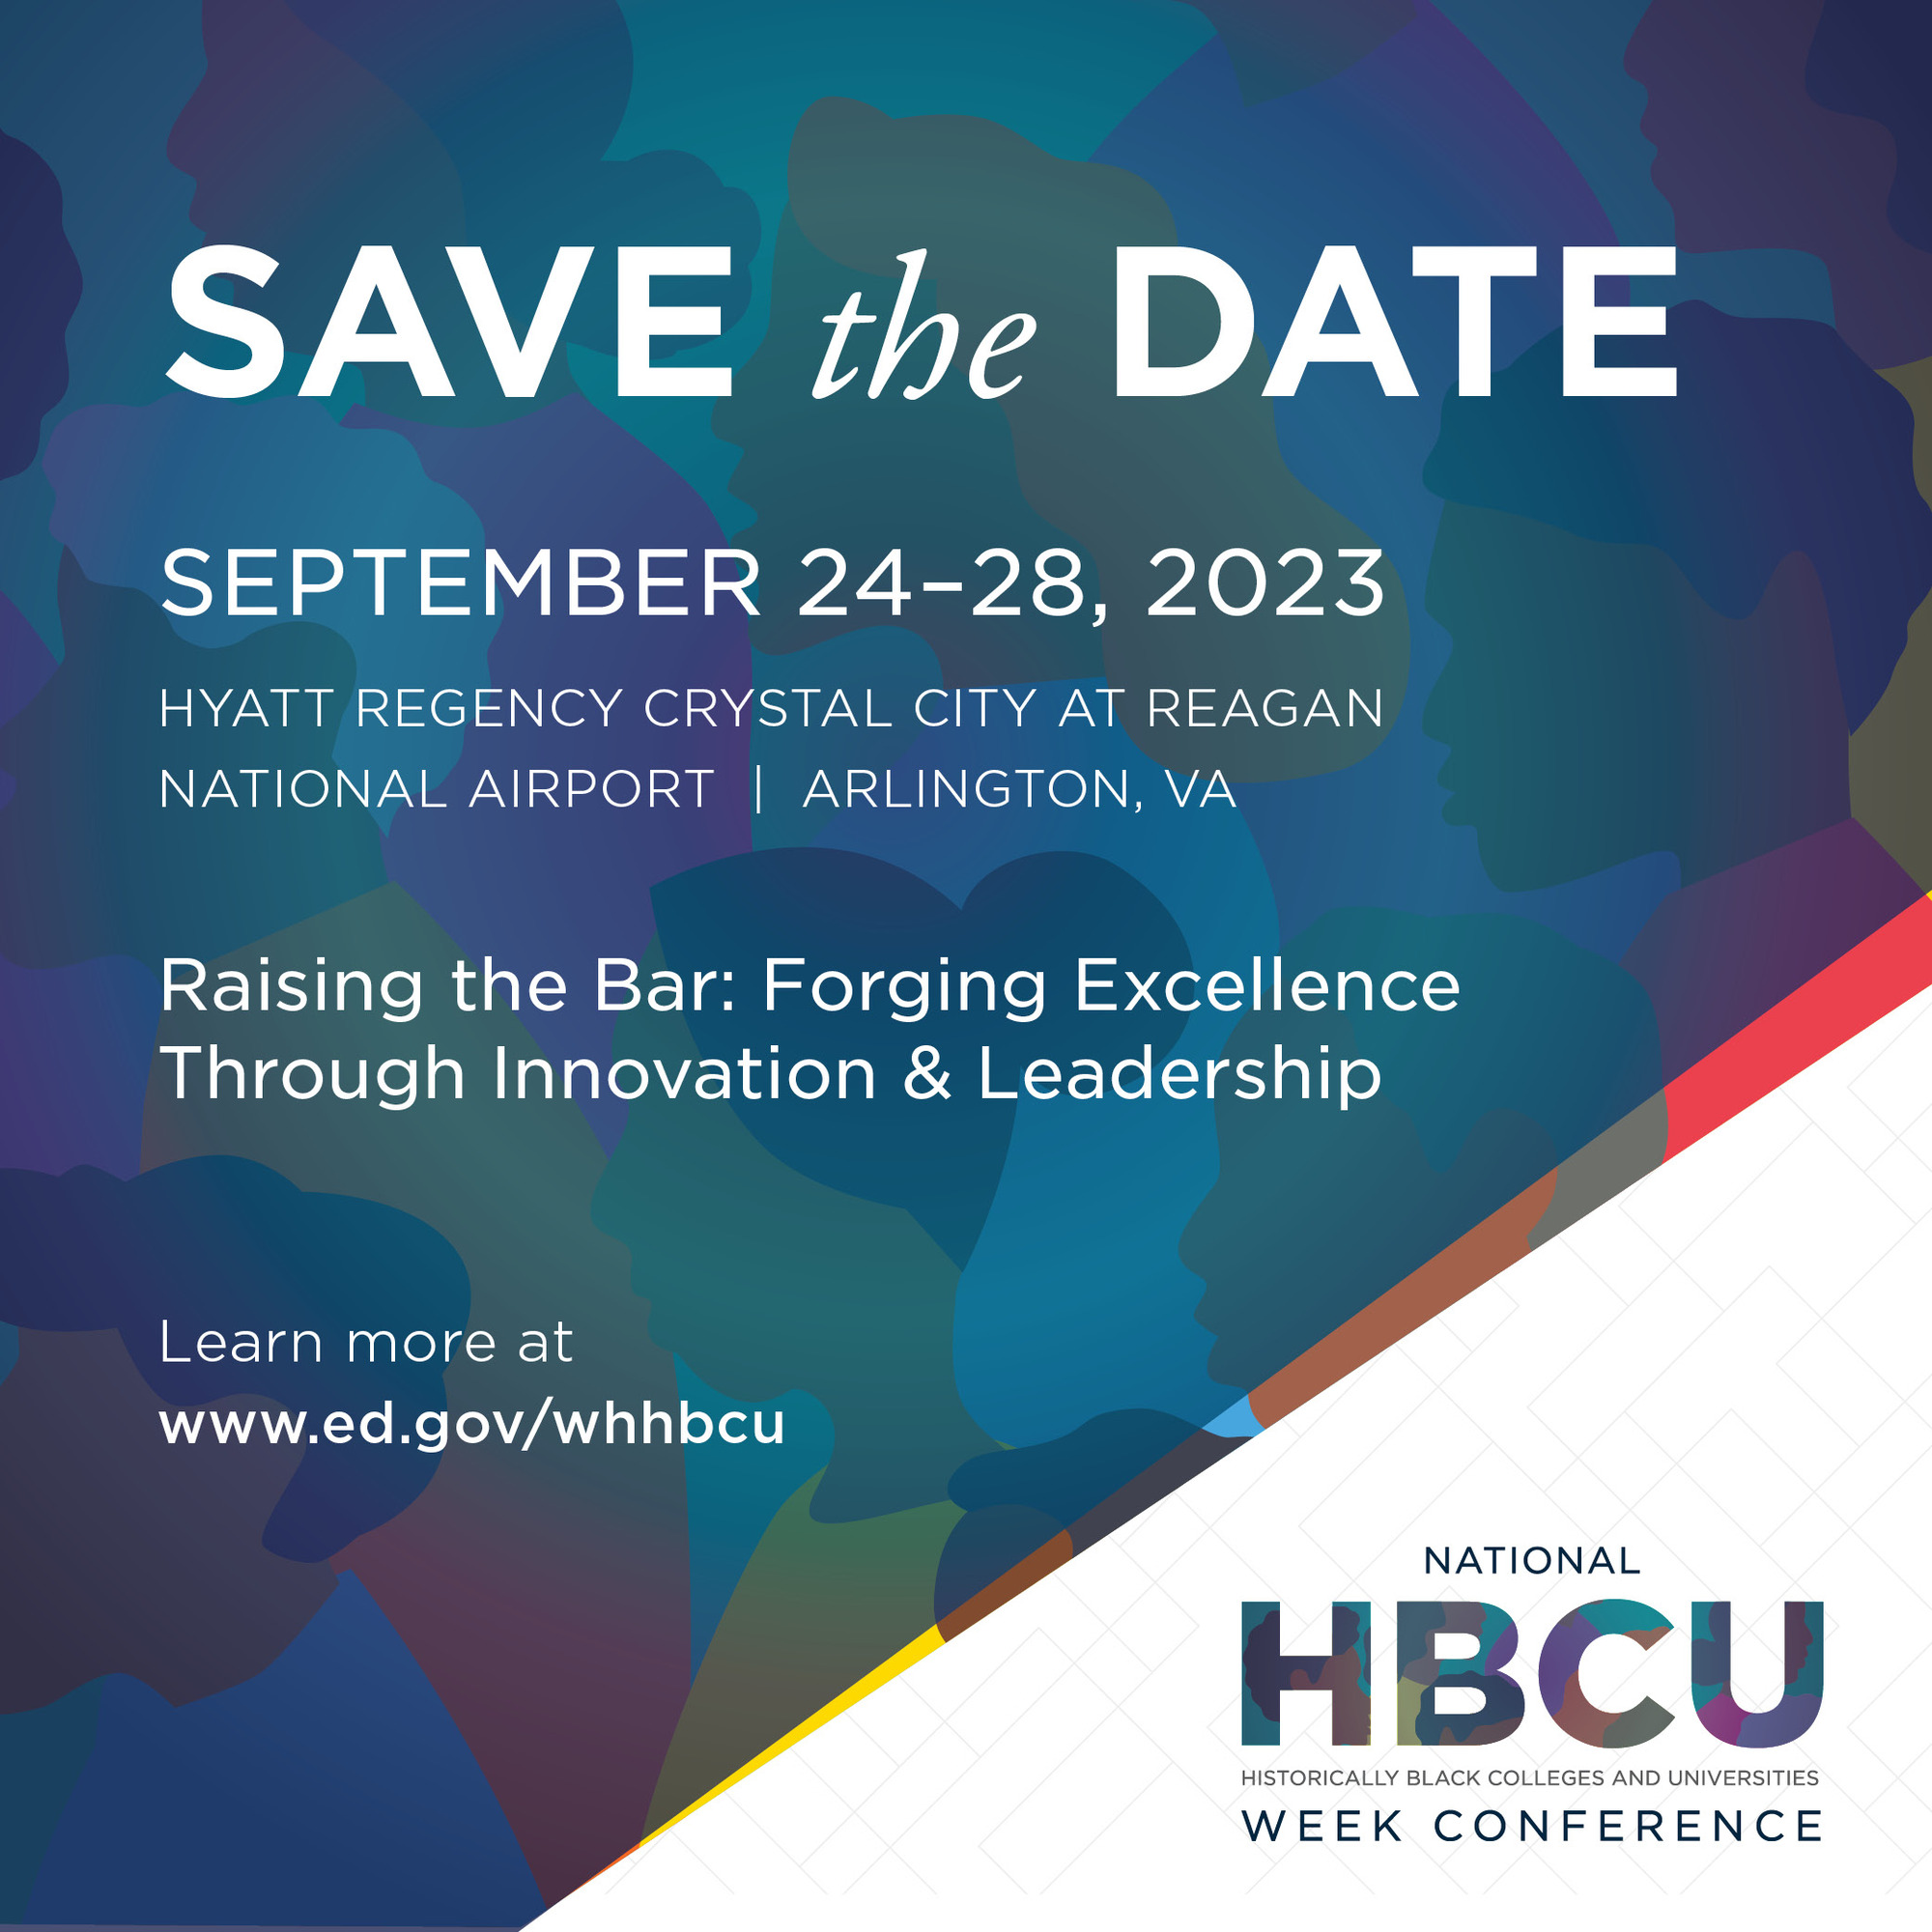 HBCU Week Conference Save the Date